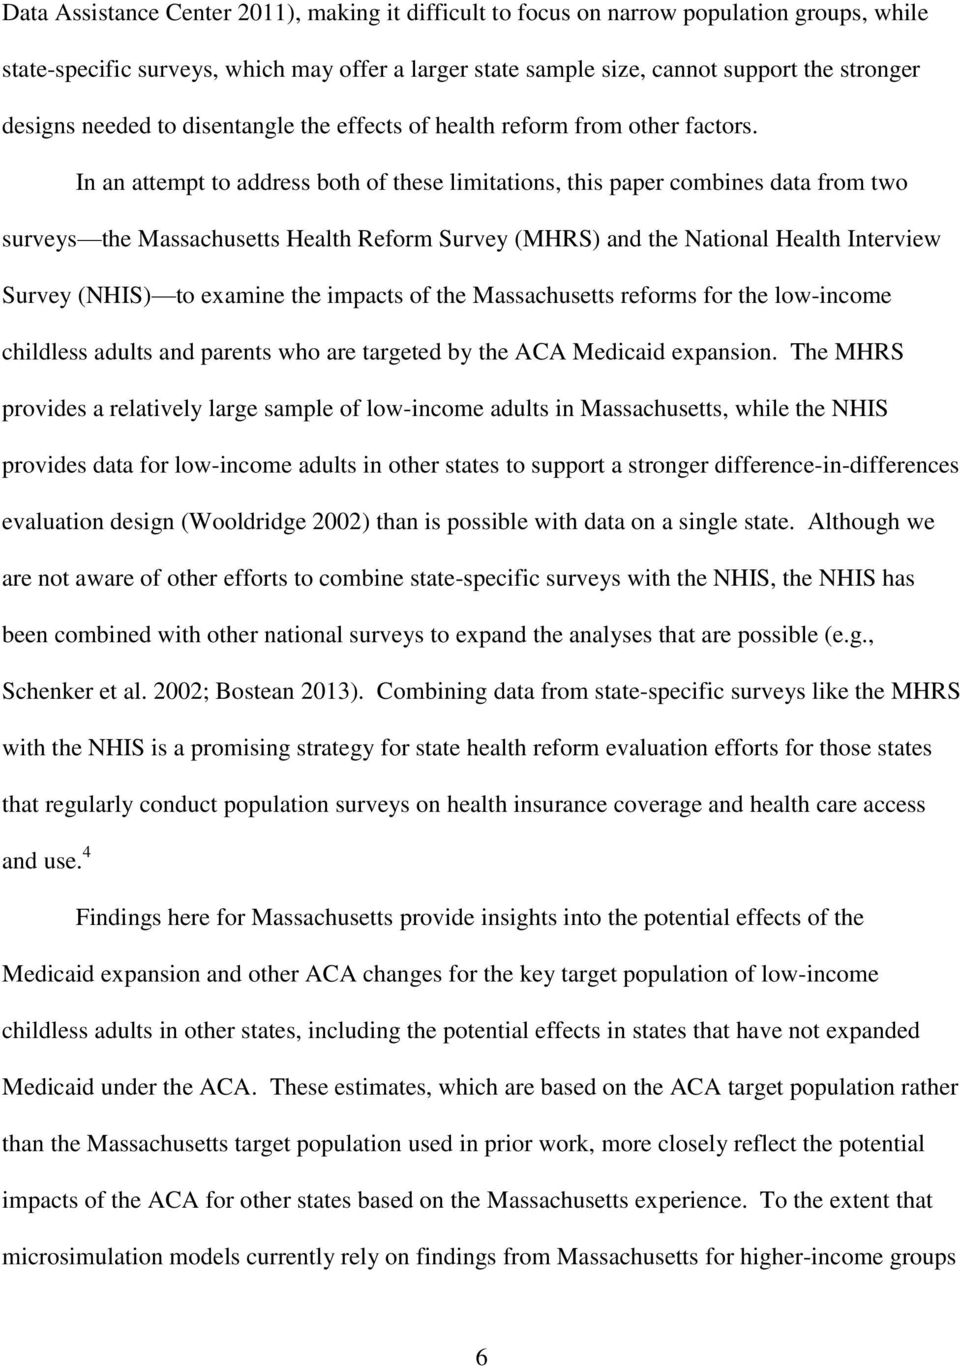 In an attempt to address both of these limitations, this paper combines data from two surveys the Massachusetts Health Reform Survey (MHRS) and the National Health Interview Survey (NHIS) to examine